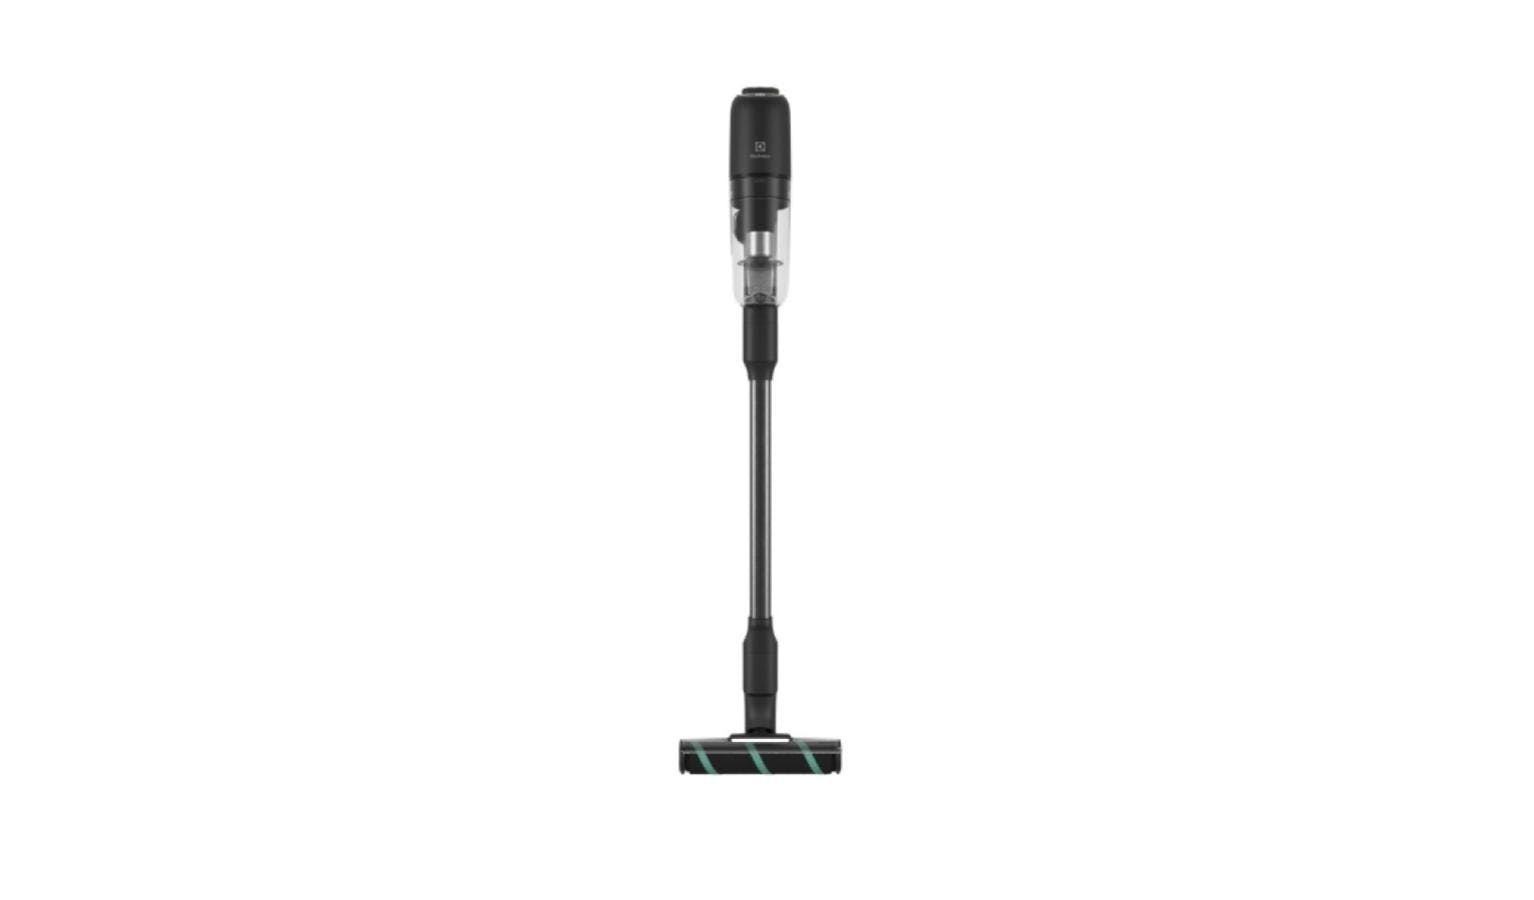 Electrolux Handstick Vacuum Cleaner, Lightweight with High Suction Power, Long Runtime and 5-Step Filtration, Granite Grey